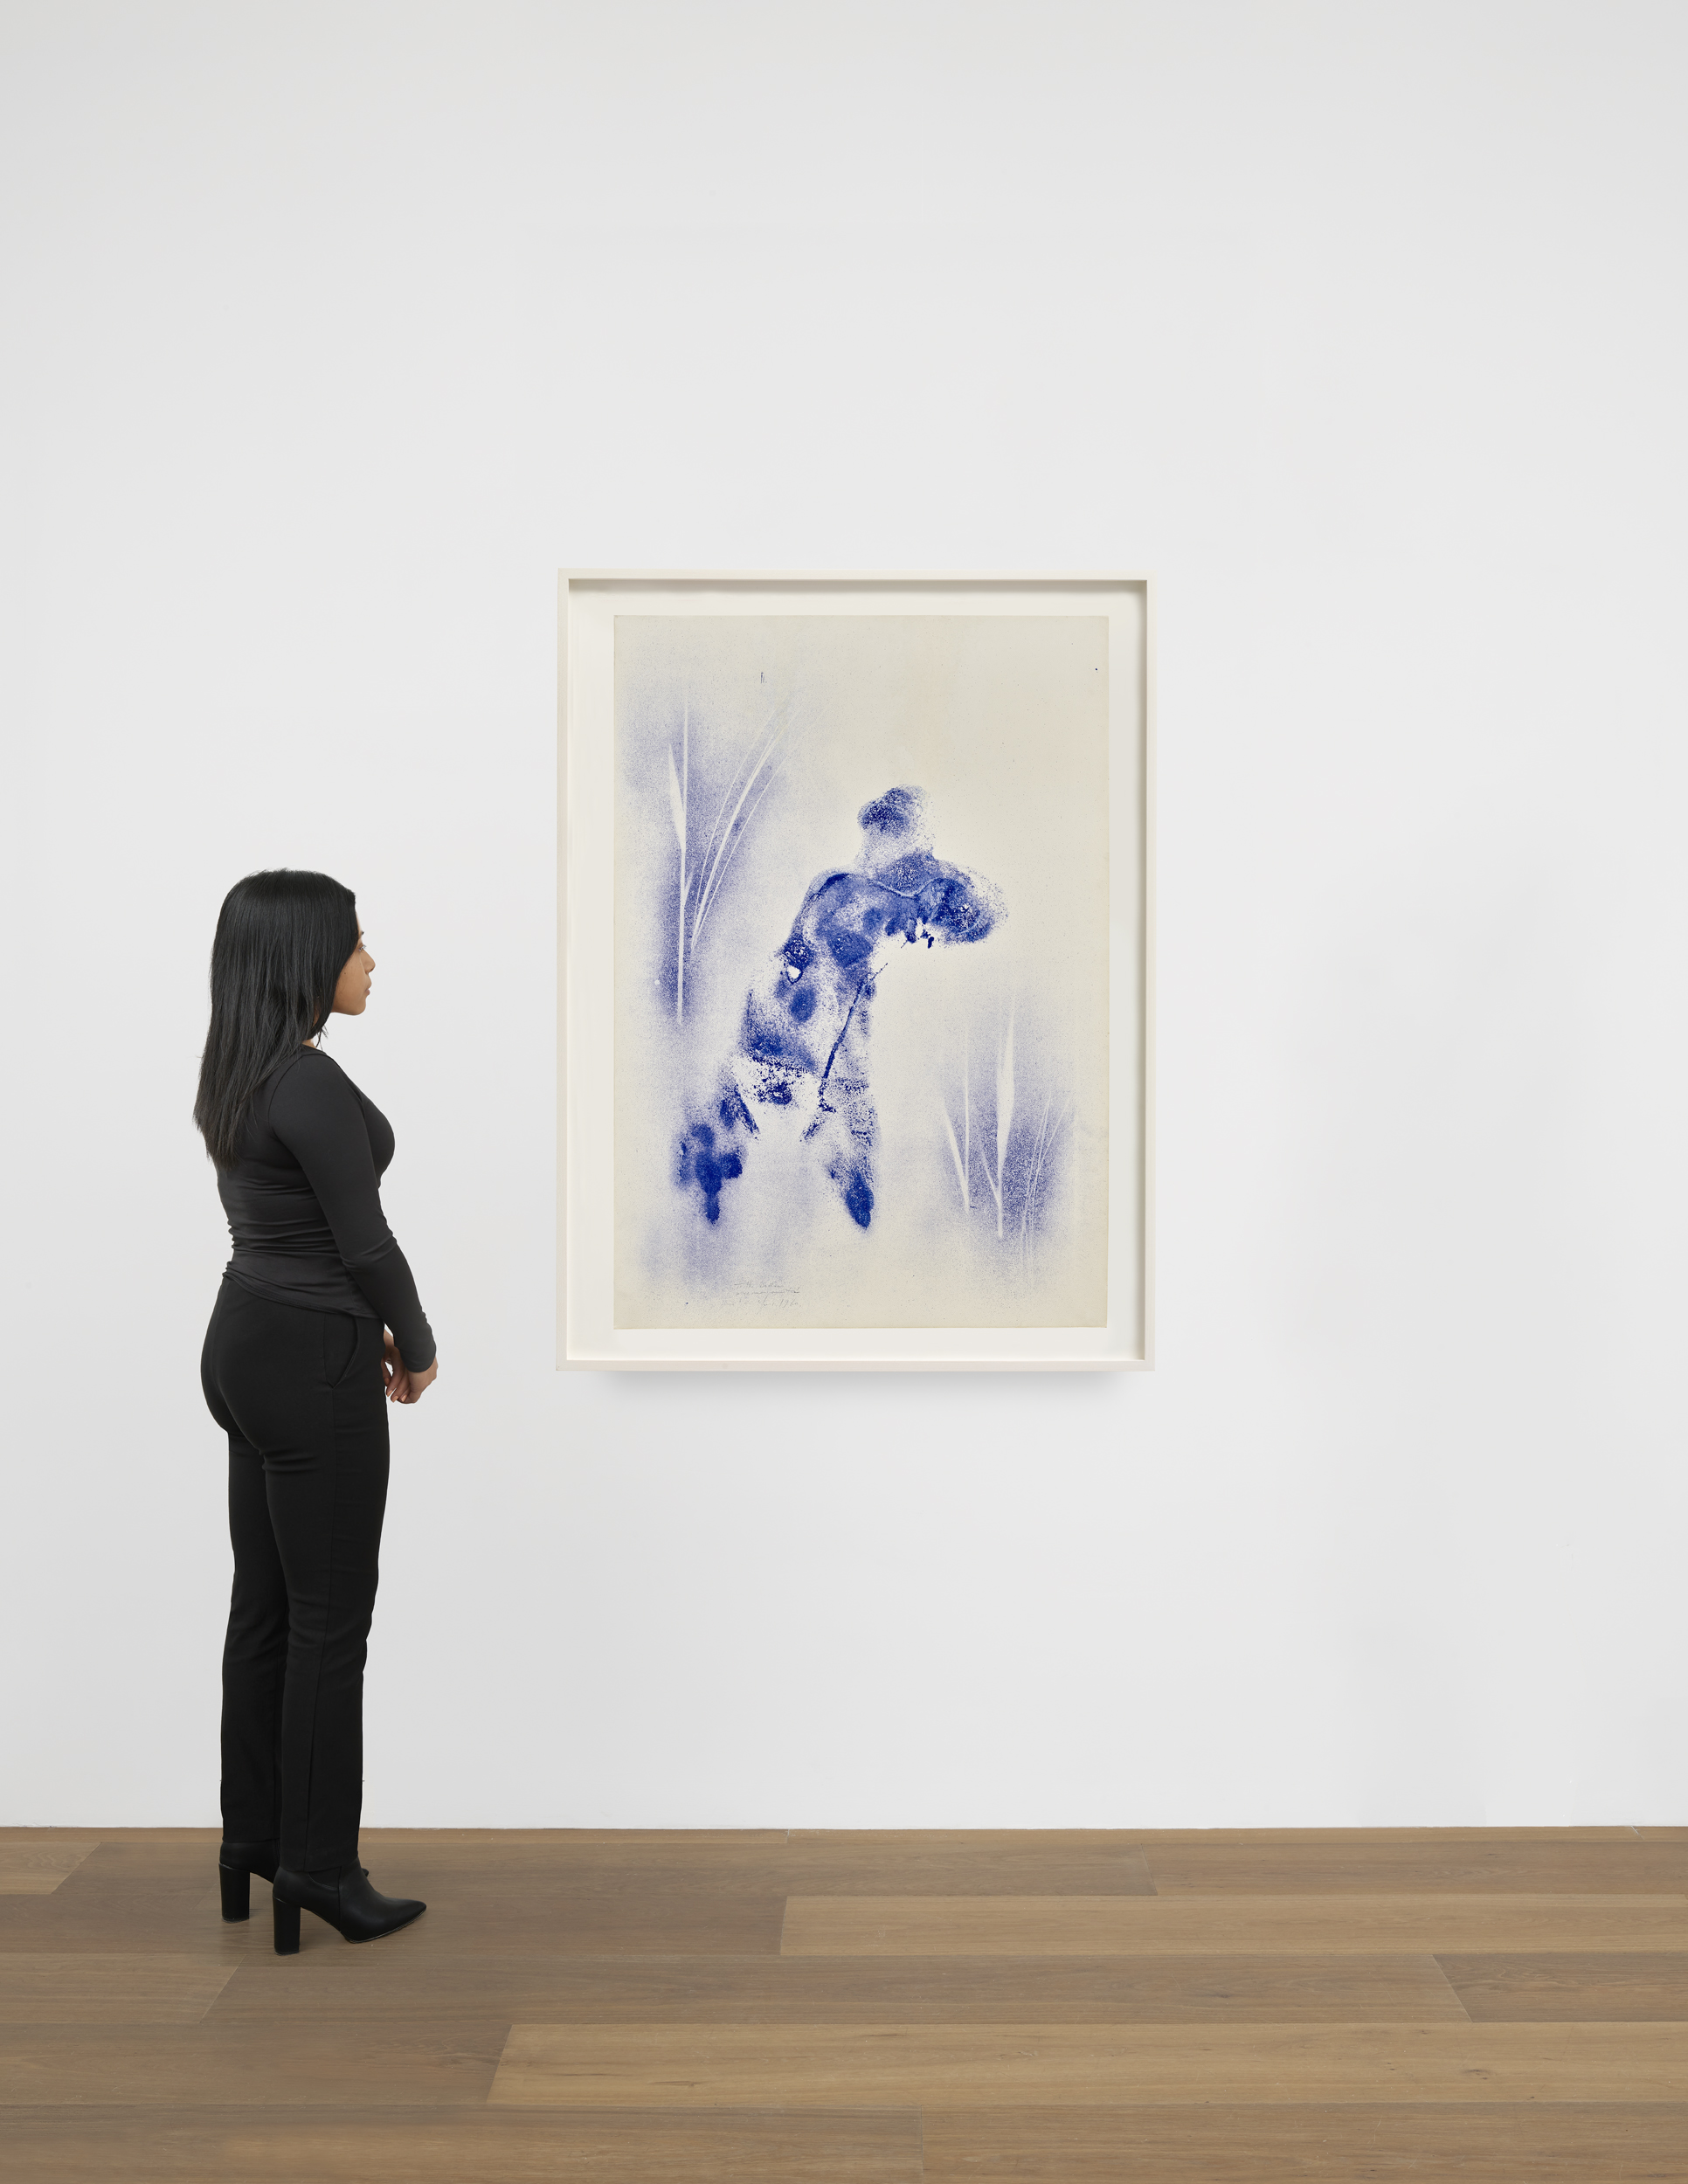 Scale view of Yves Klein's painting Anthropometrie sans titre (ANT 162)